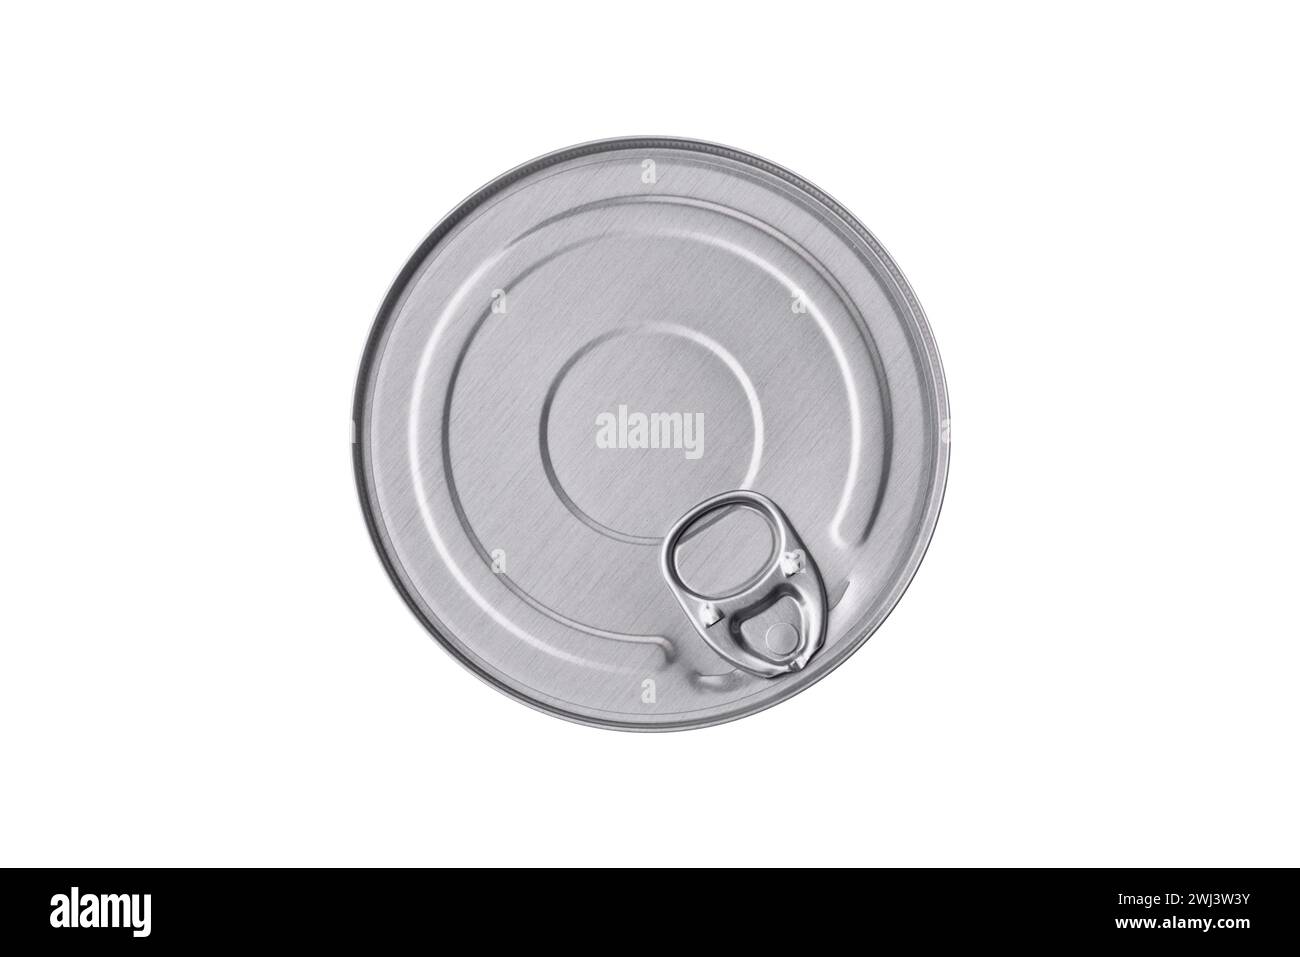 Tin metal can with canned food round shape with a key Stock Photo